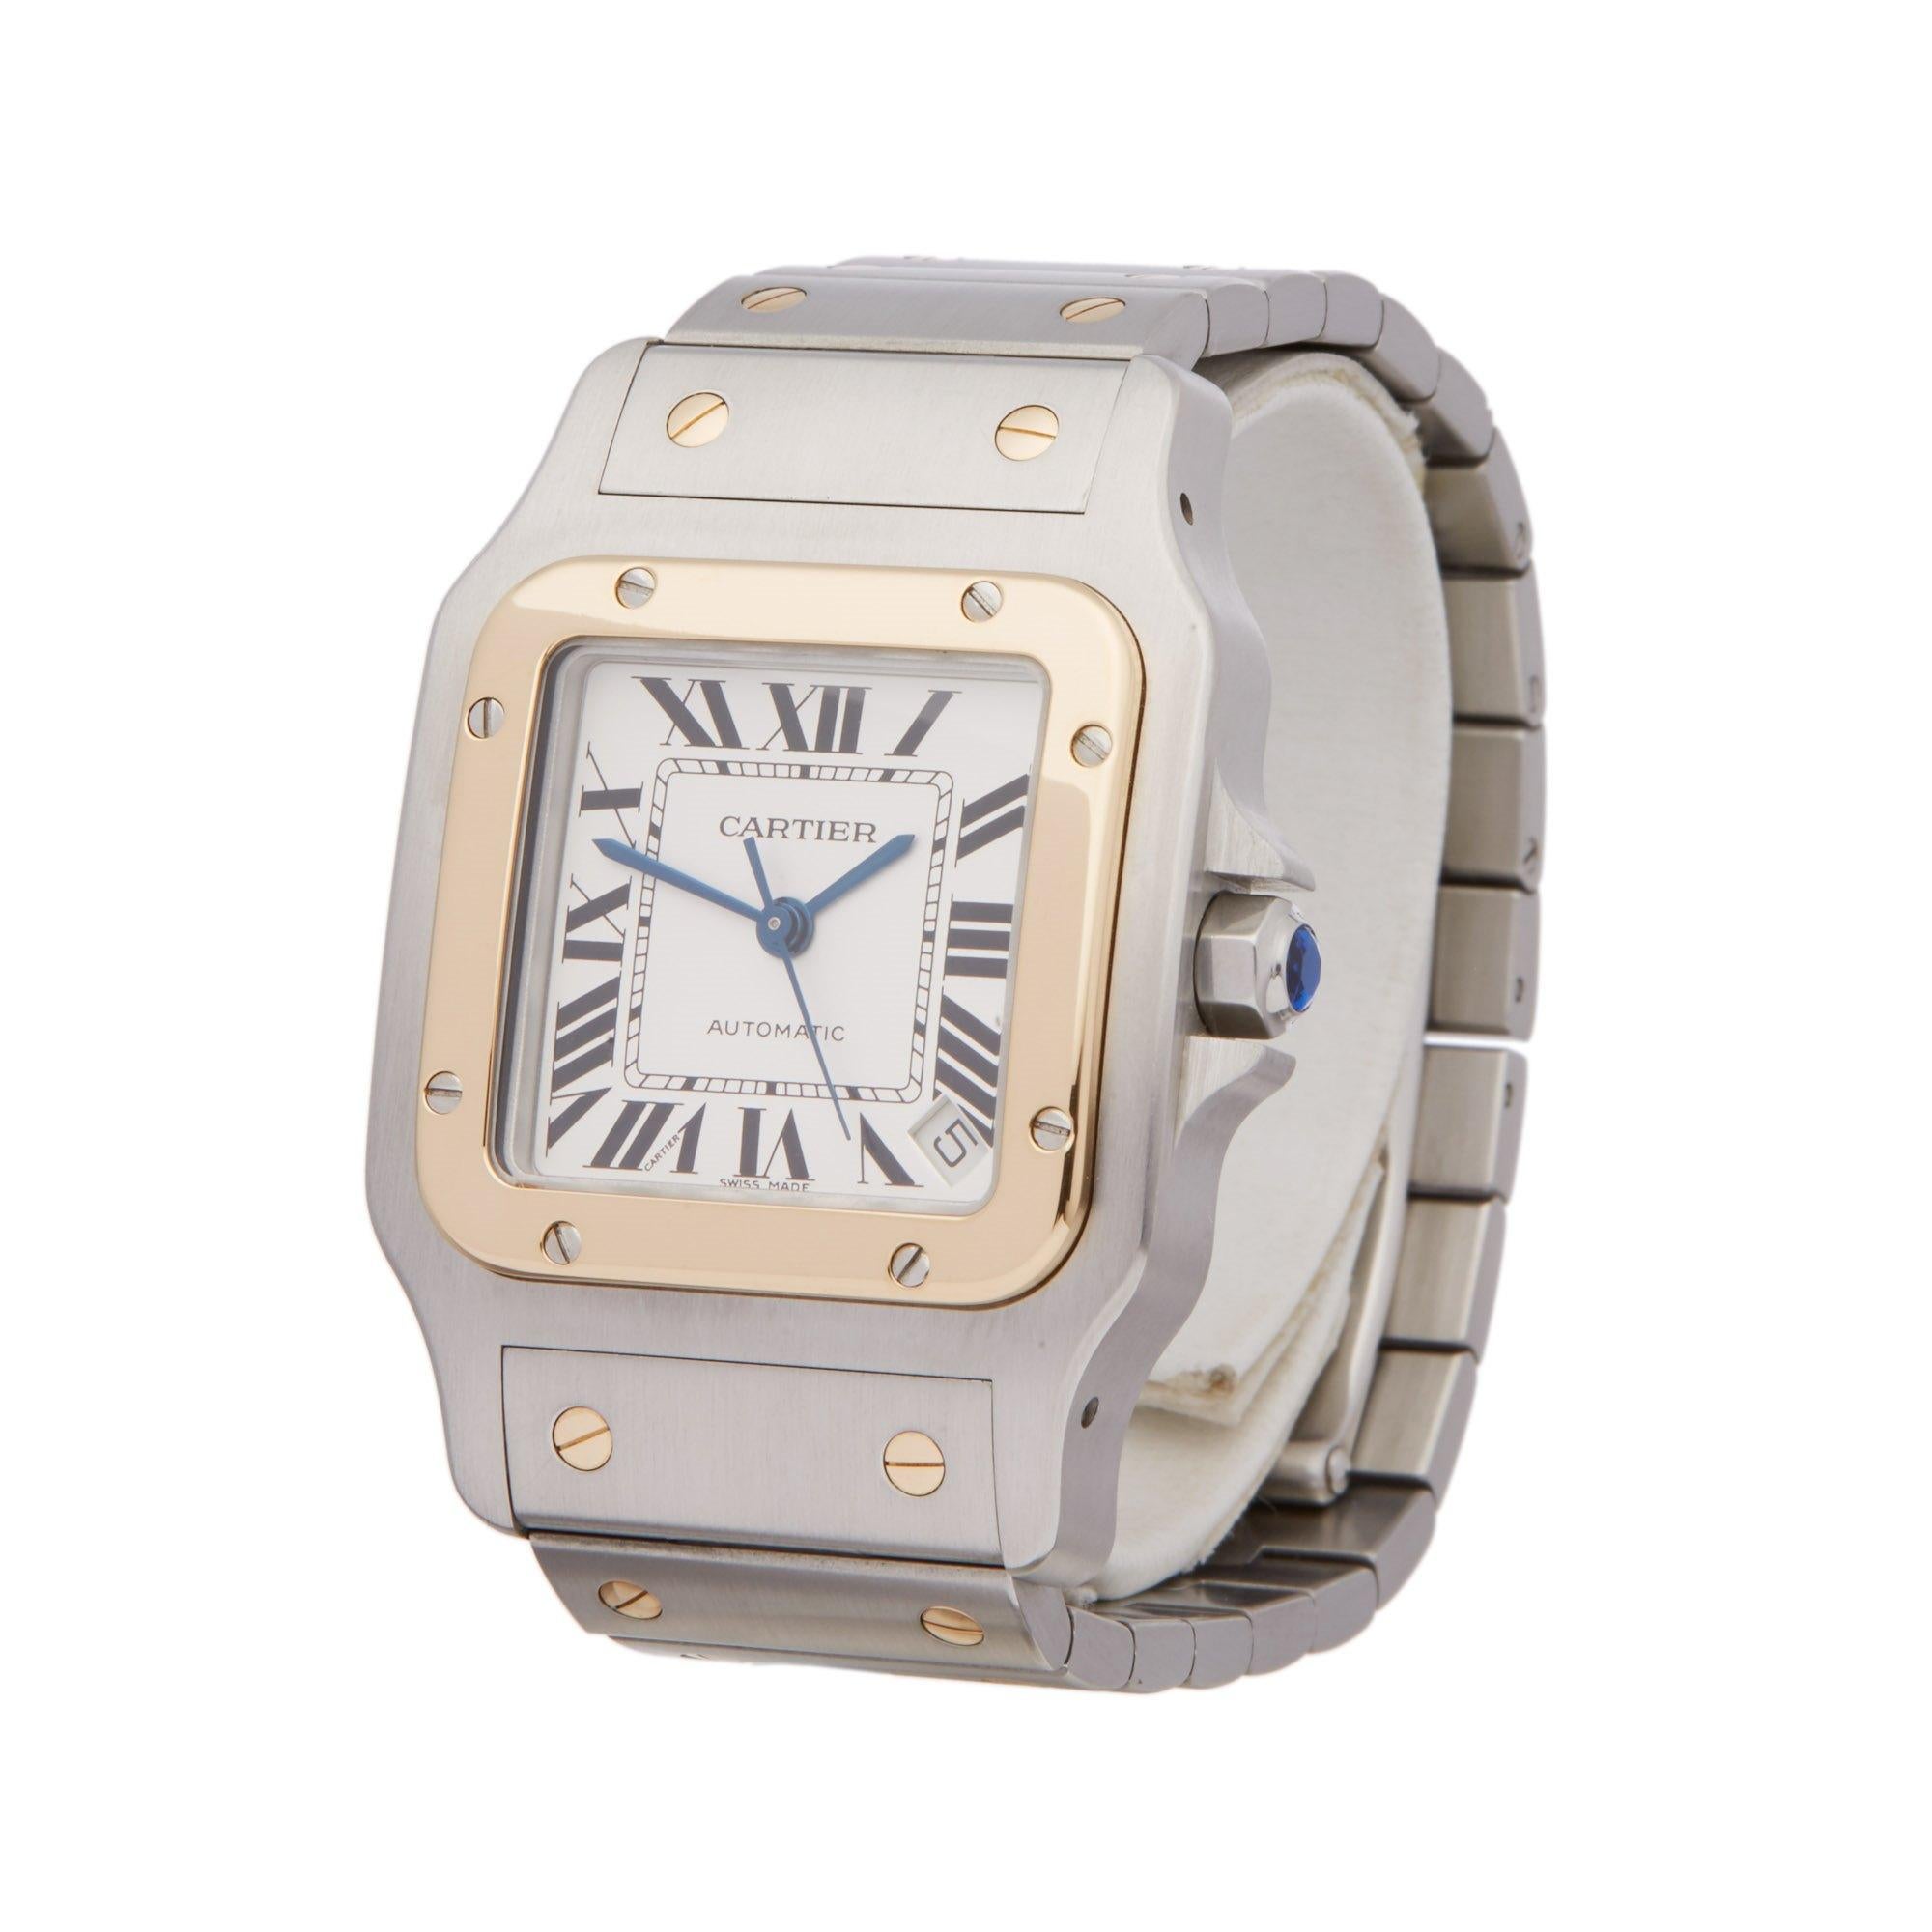 Xupes Reference: COM002437
Manufacturer: Cartier
Model: Santos
Model Variant: Galbee
Model Number: 2823
Age: Circa 2000's
Gender: Unisex
Complete With: Xupes Presentation Box 
Dial: White Roman
Glass: Sapphire Crystal
Case Material: Stainless Steel